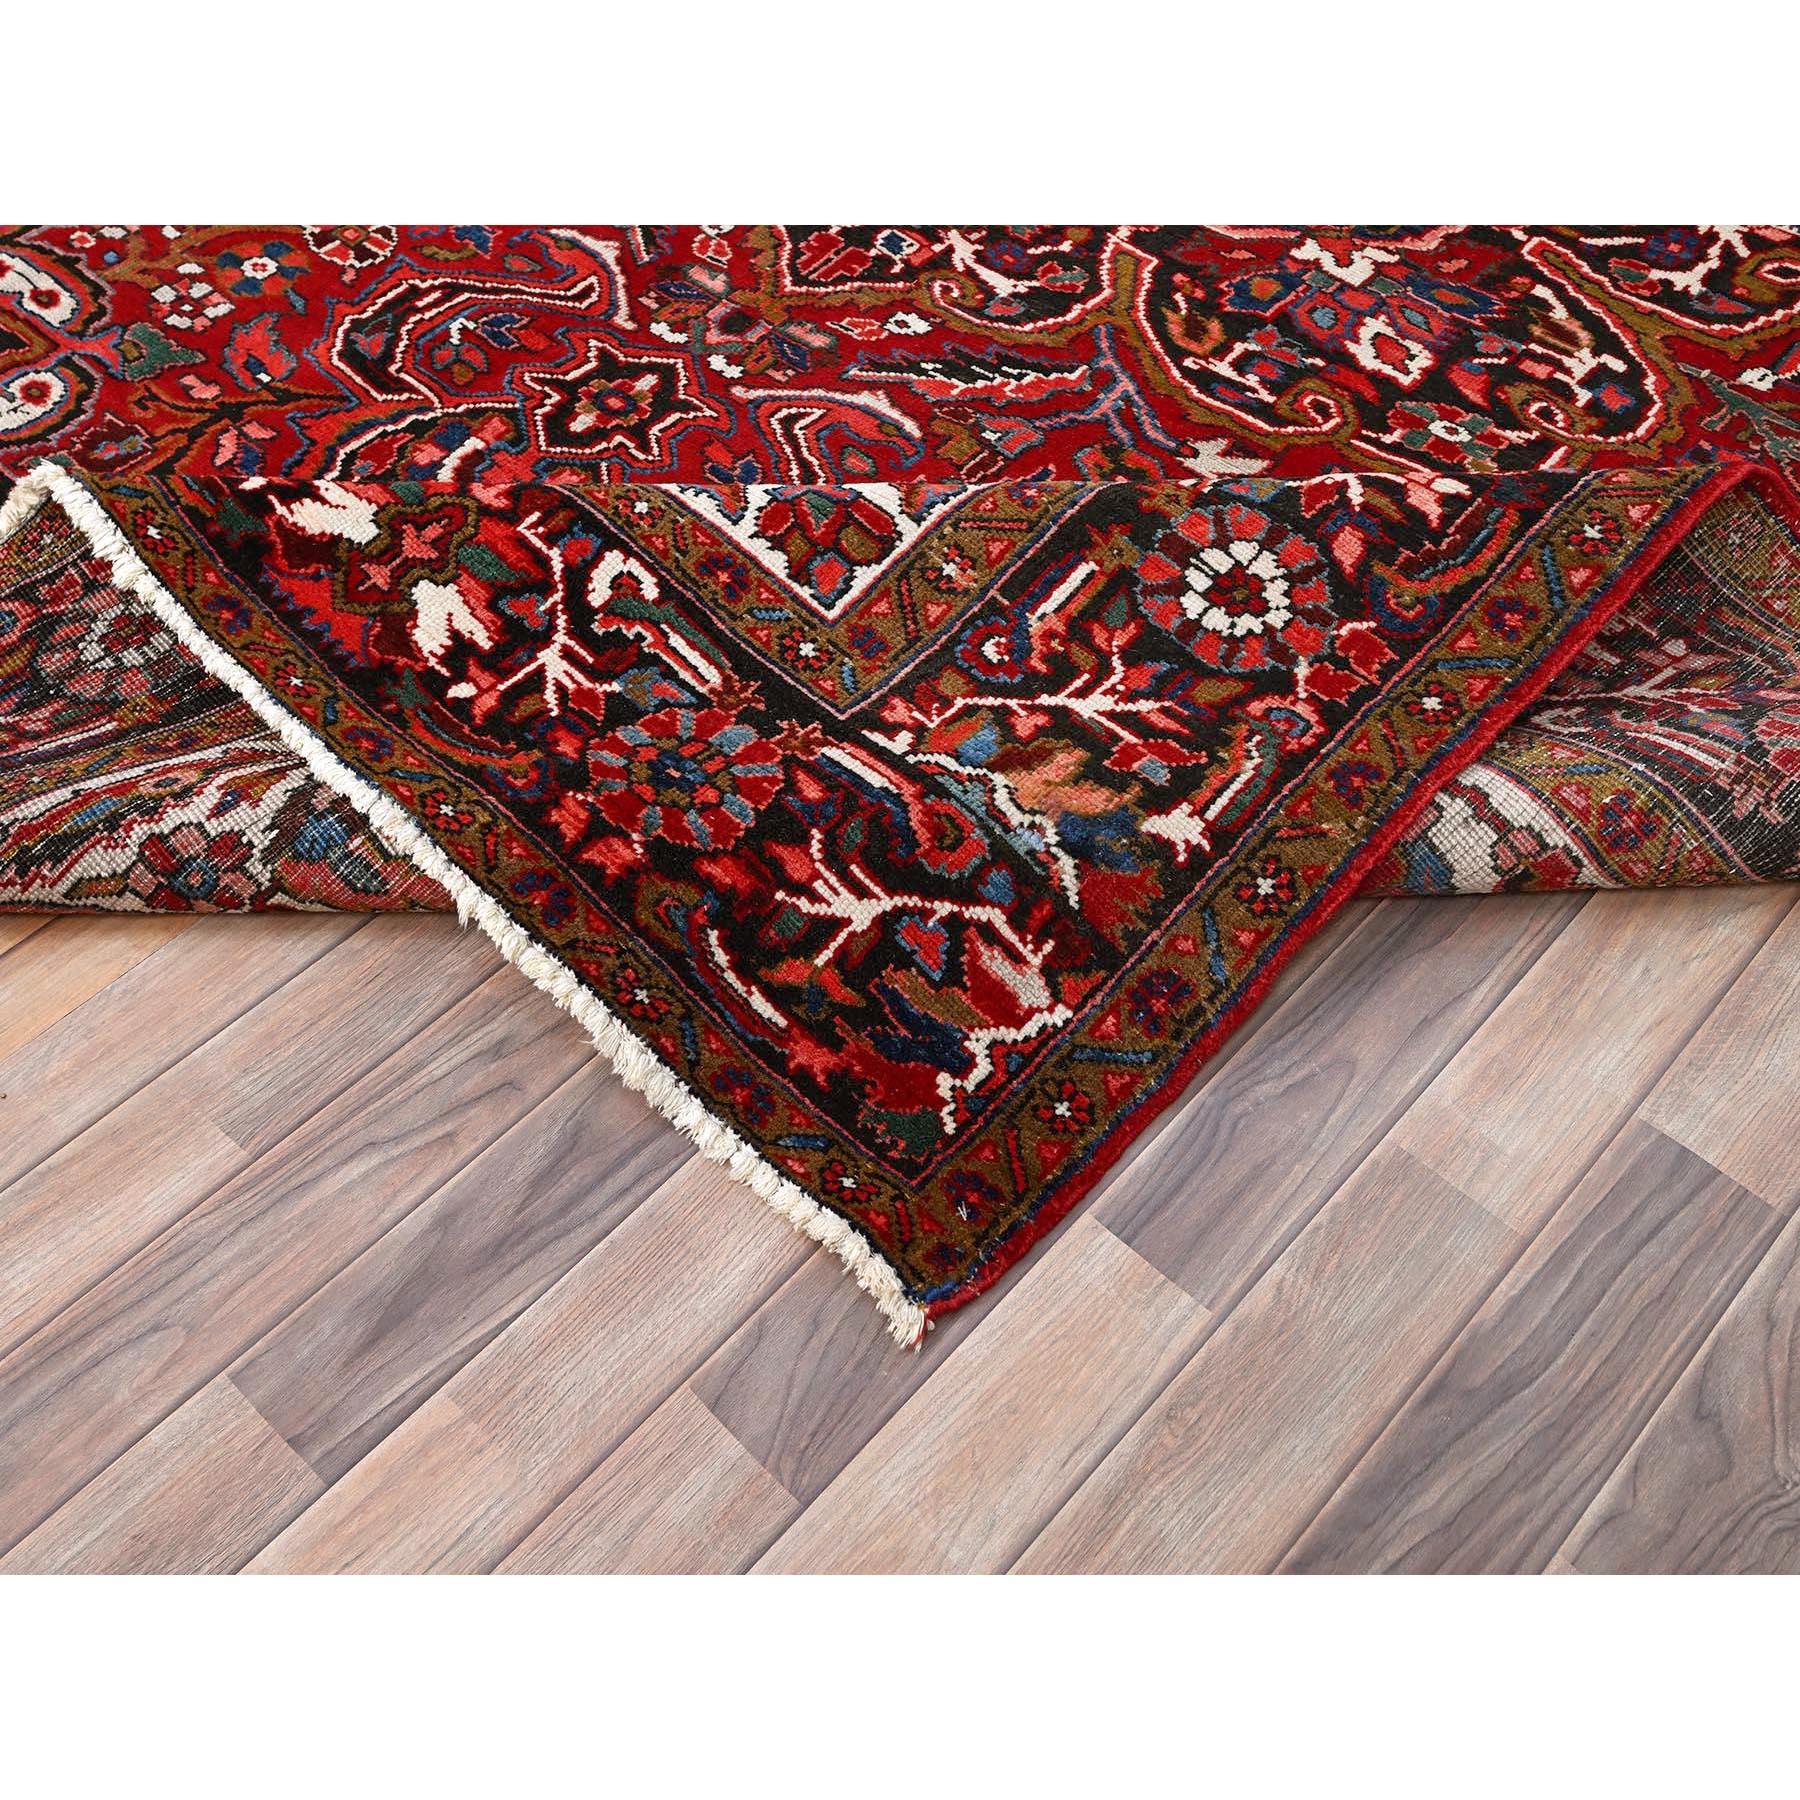 Red Rustic Feel Evenly Worn Pure Wool Hand Knotted Vintage Persian Heriz Rug 1